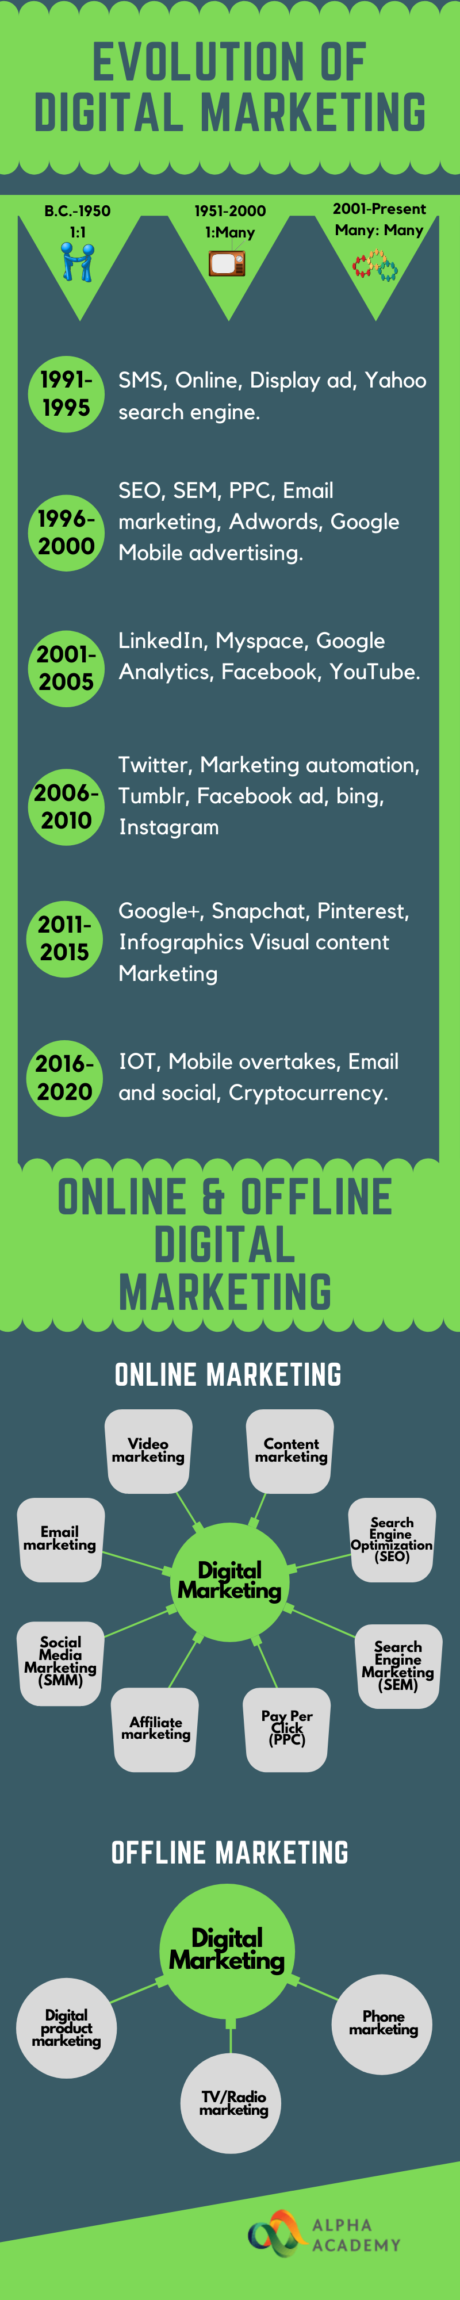 Infographics on Digital Marketing Evolution and branches